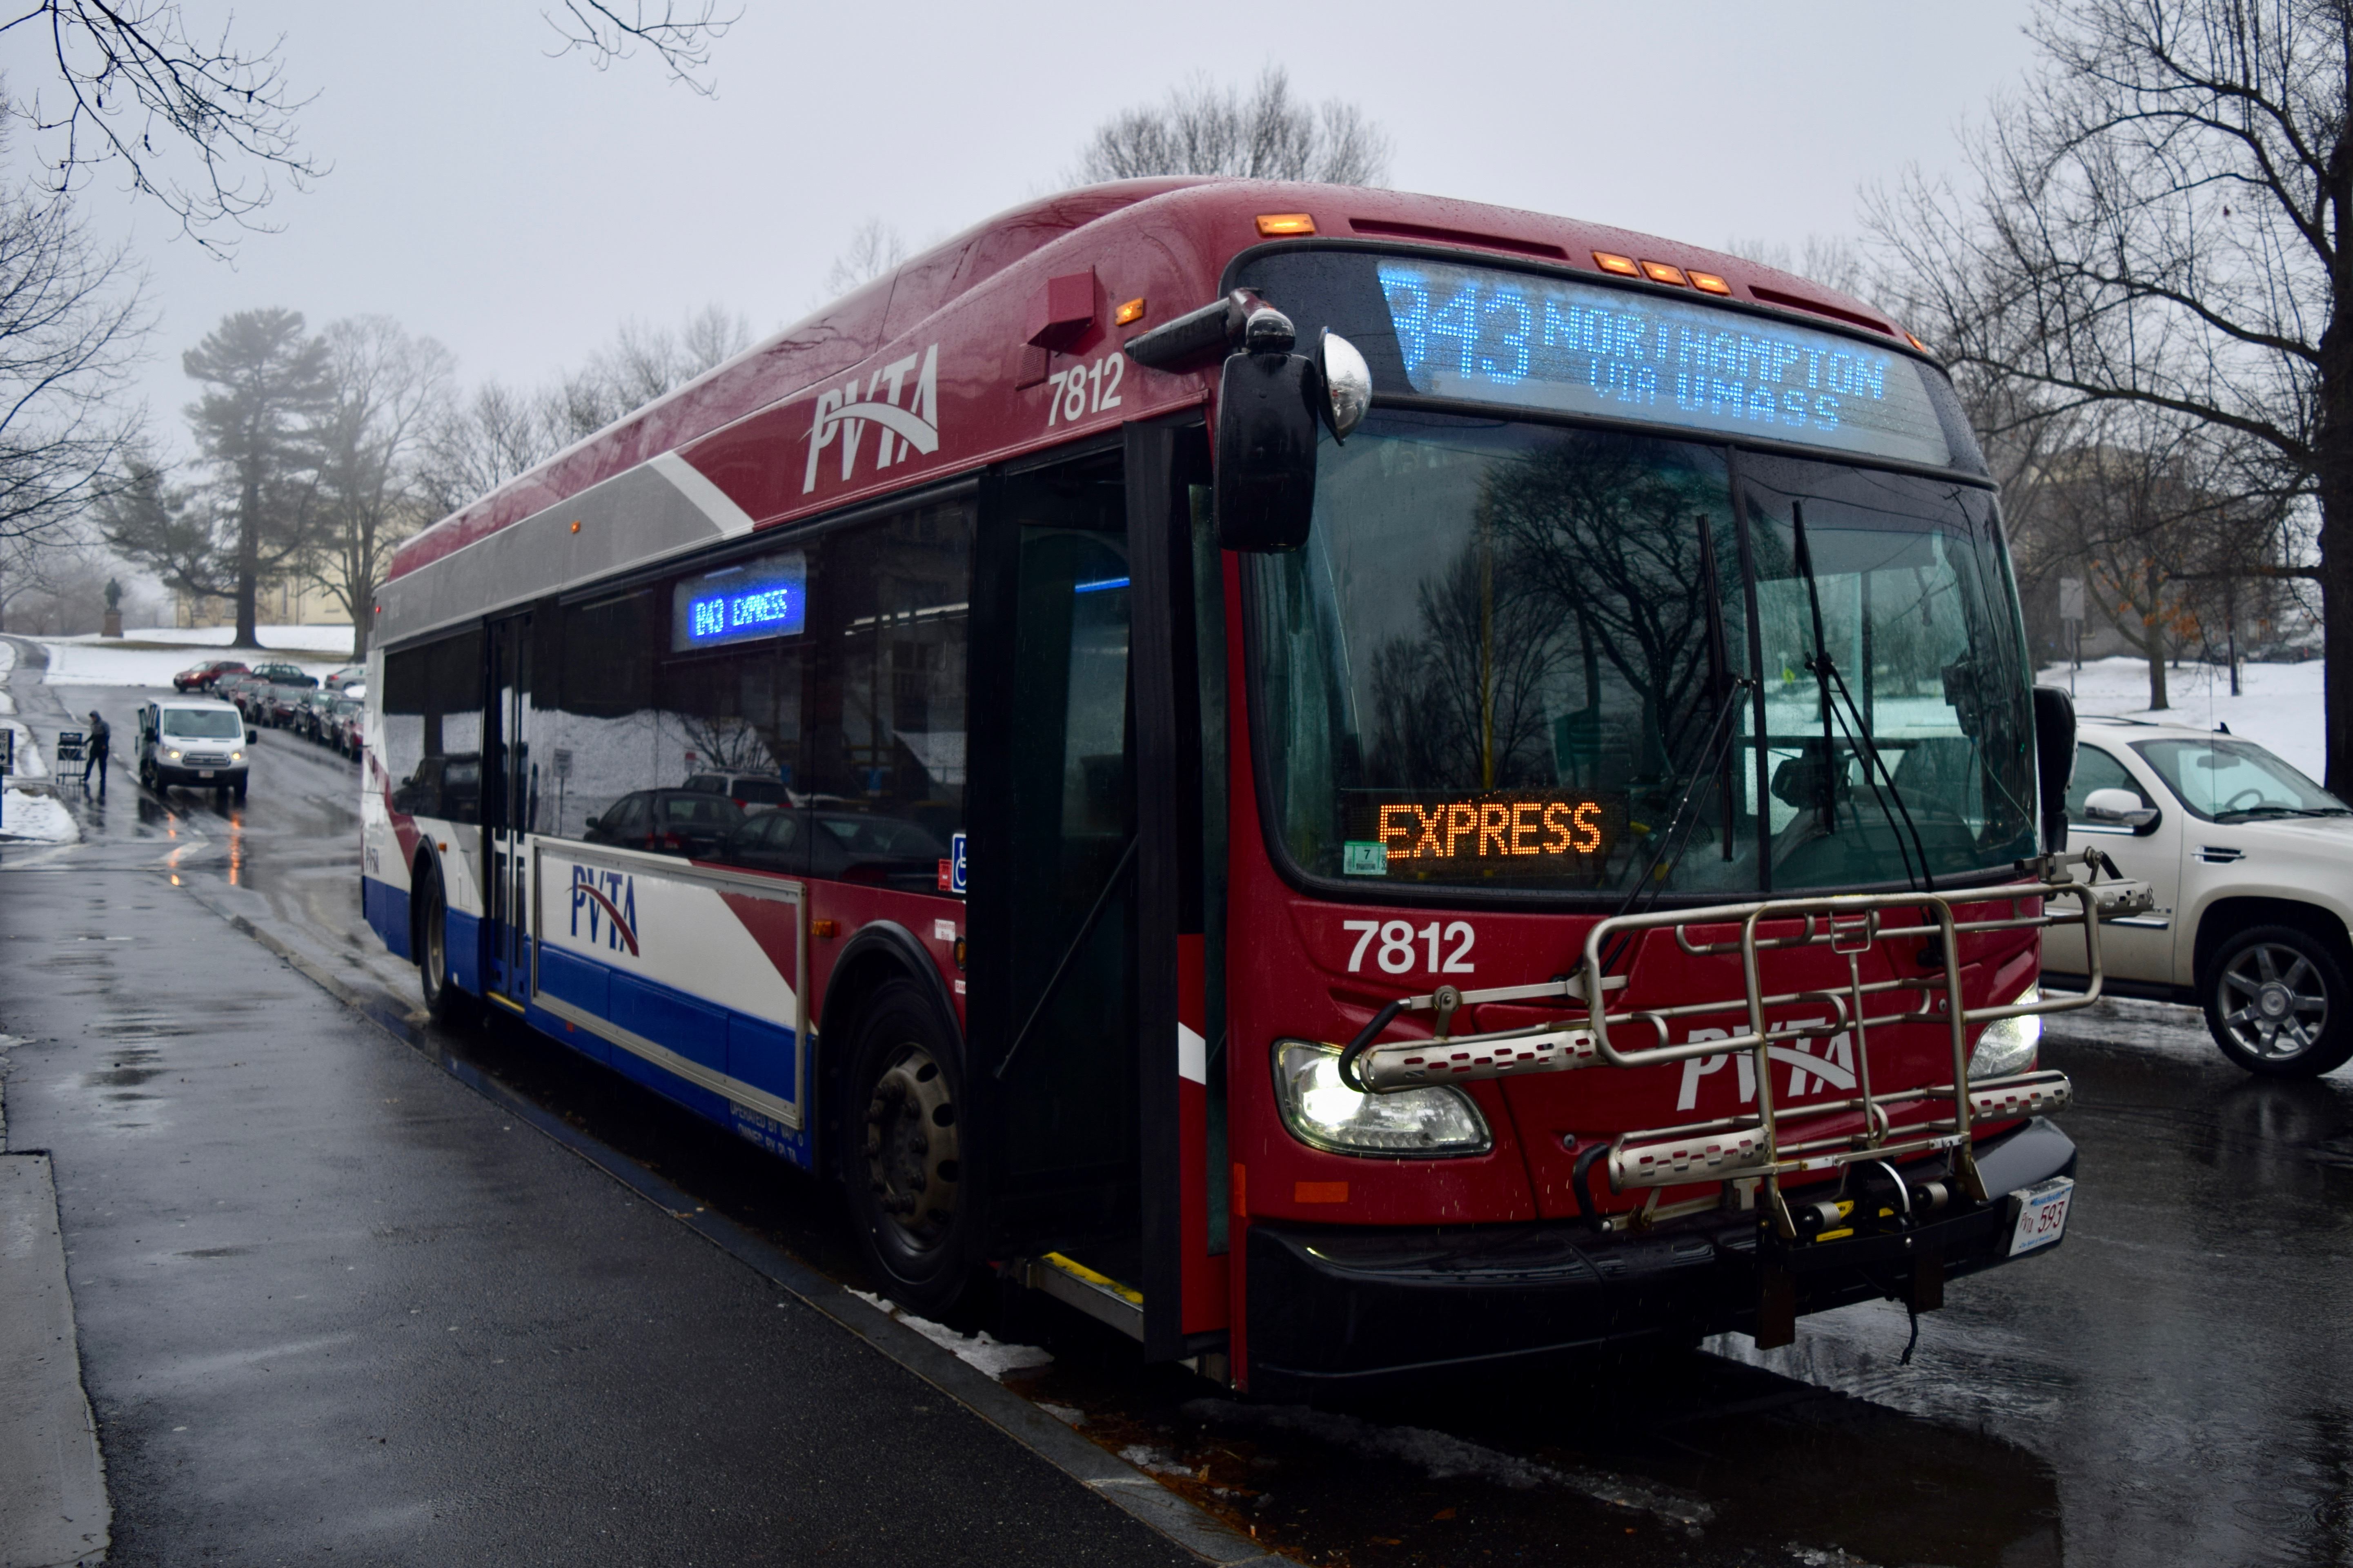 B43 Bus Route Under Examination Following Funding Cuts The Amherst. 